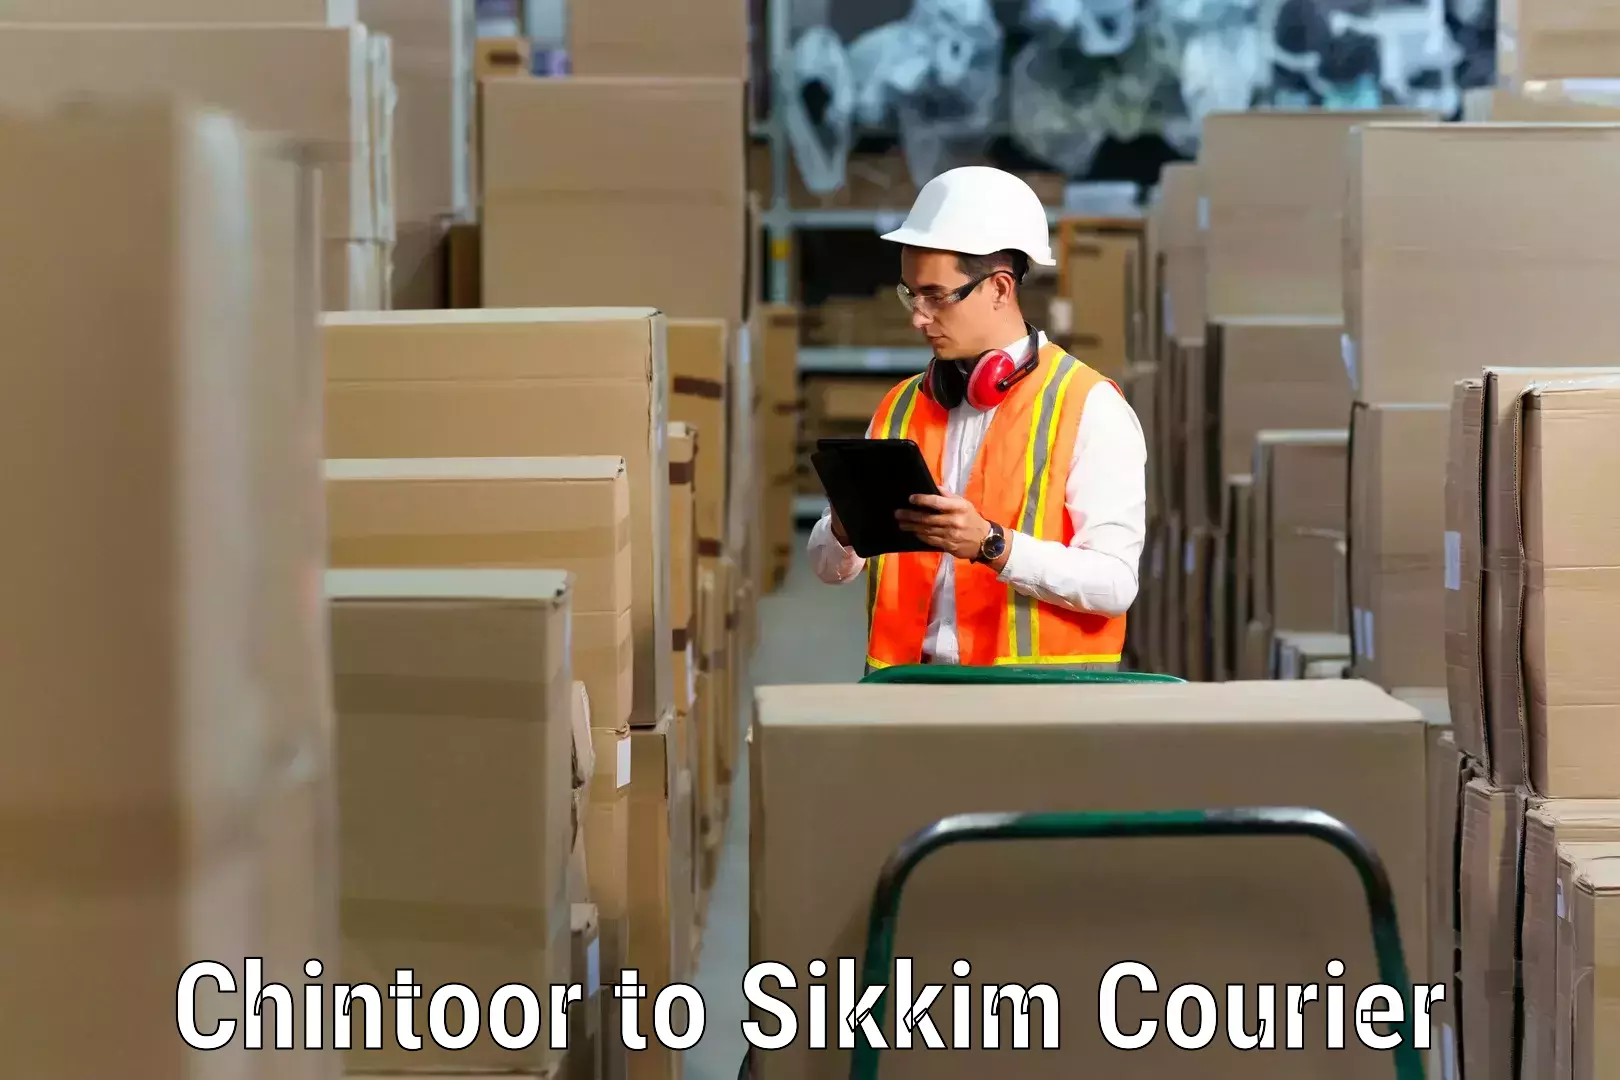 Trusted relocation experts Chintoor to Sikkim